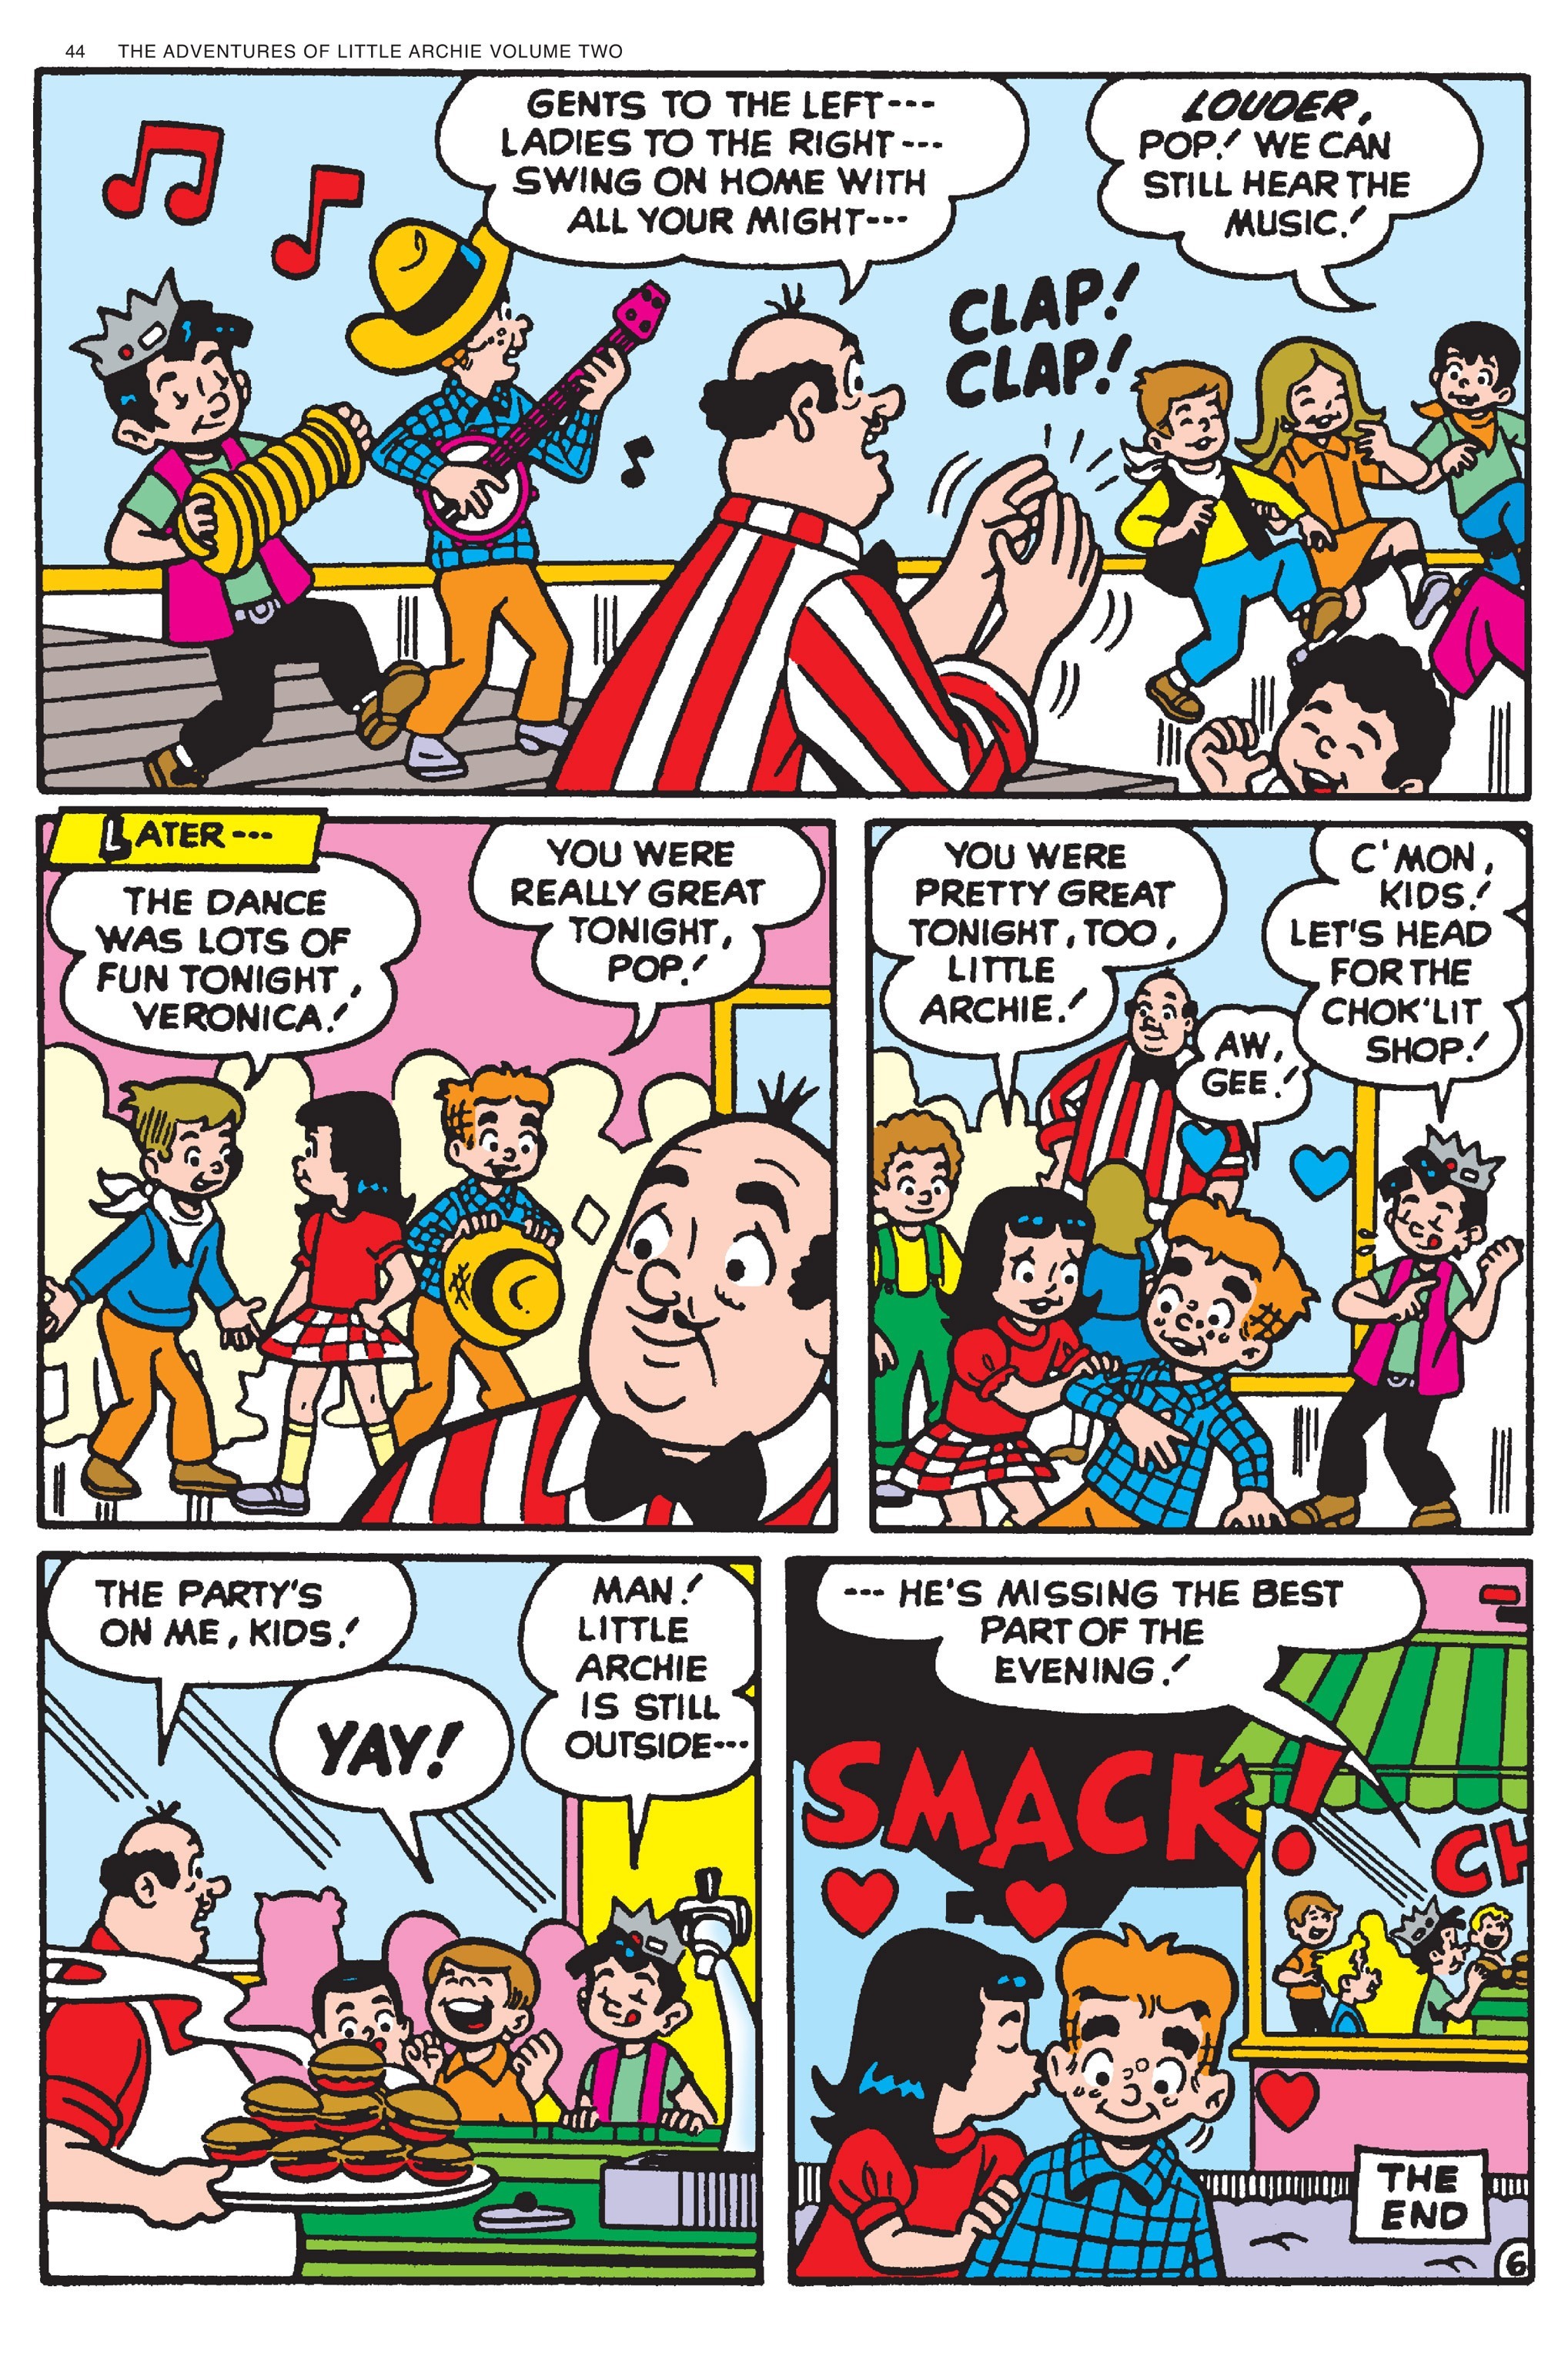 Read online Adventures of Little Archie comic -  Issue # TPB 2 - 45